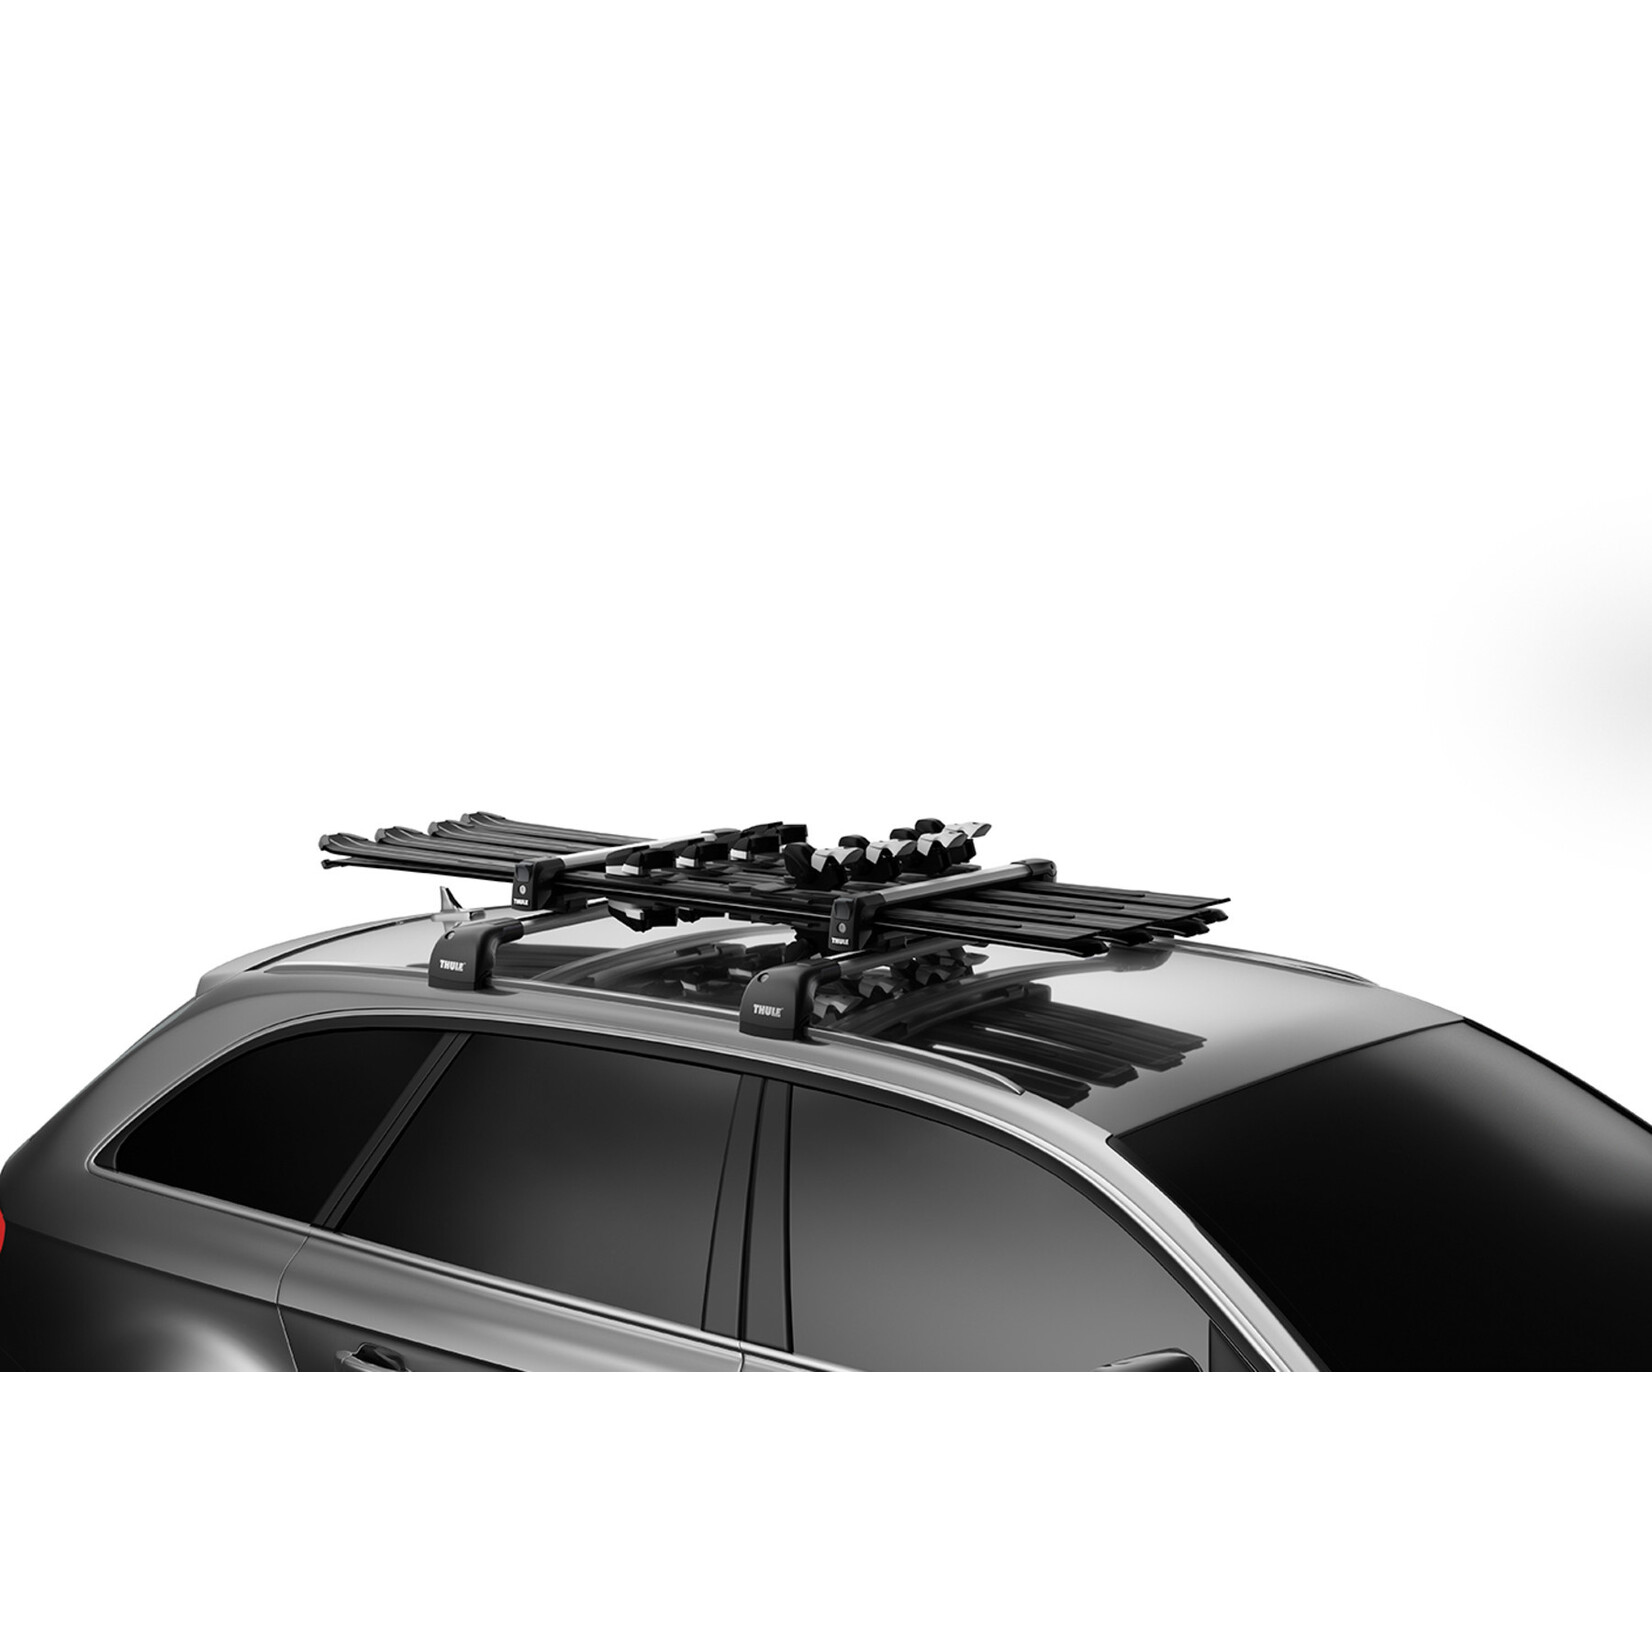 Thule Thule SnowPack M 732401 Ski Carrier (up to 4 pairs of skis or 2 snow boards)